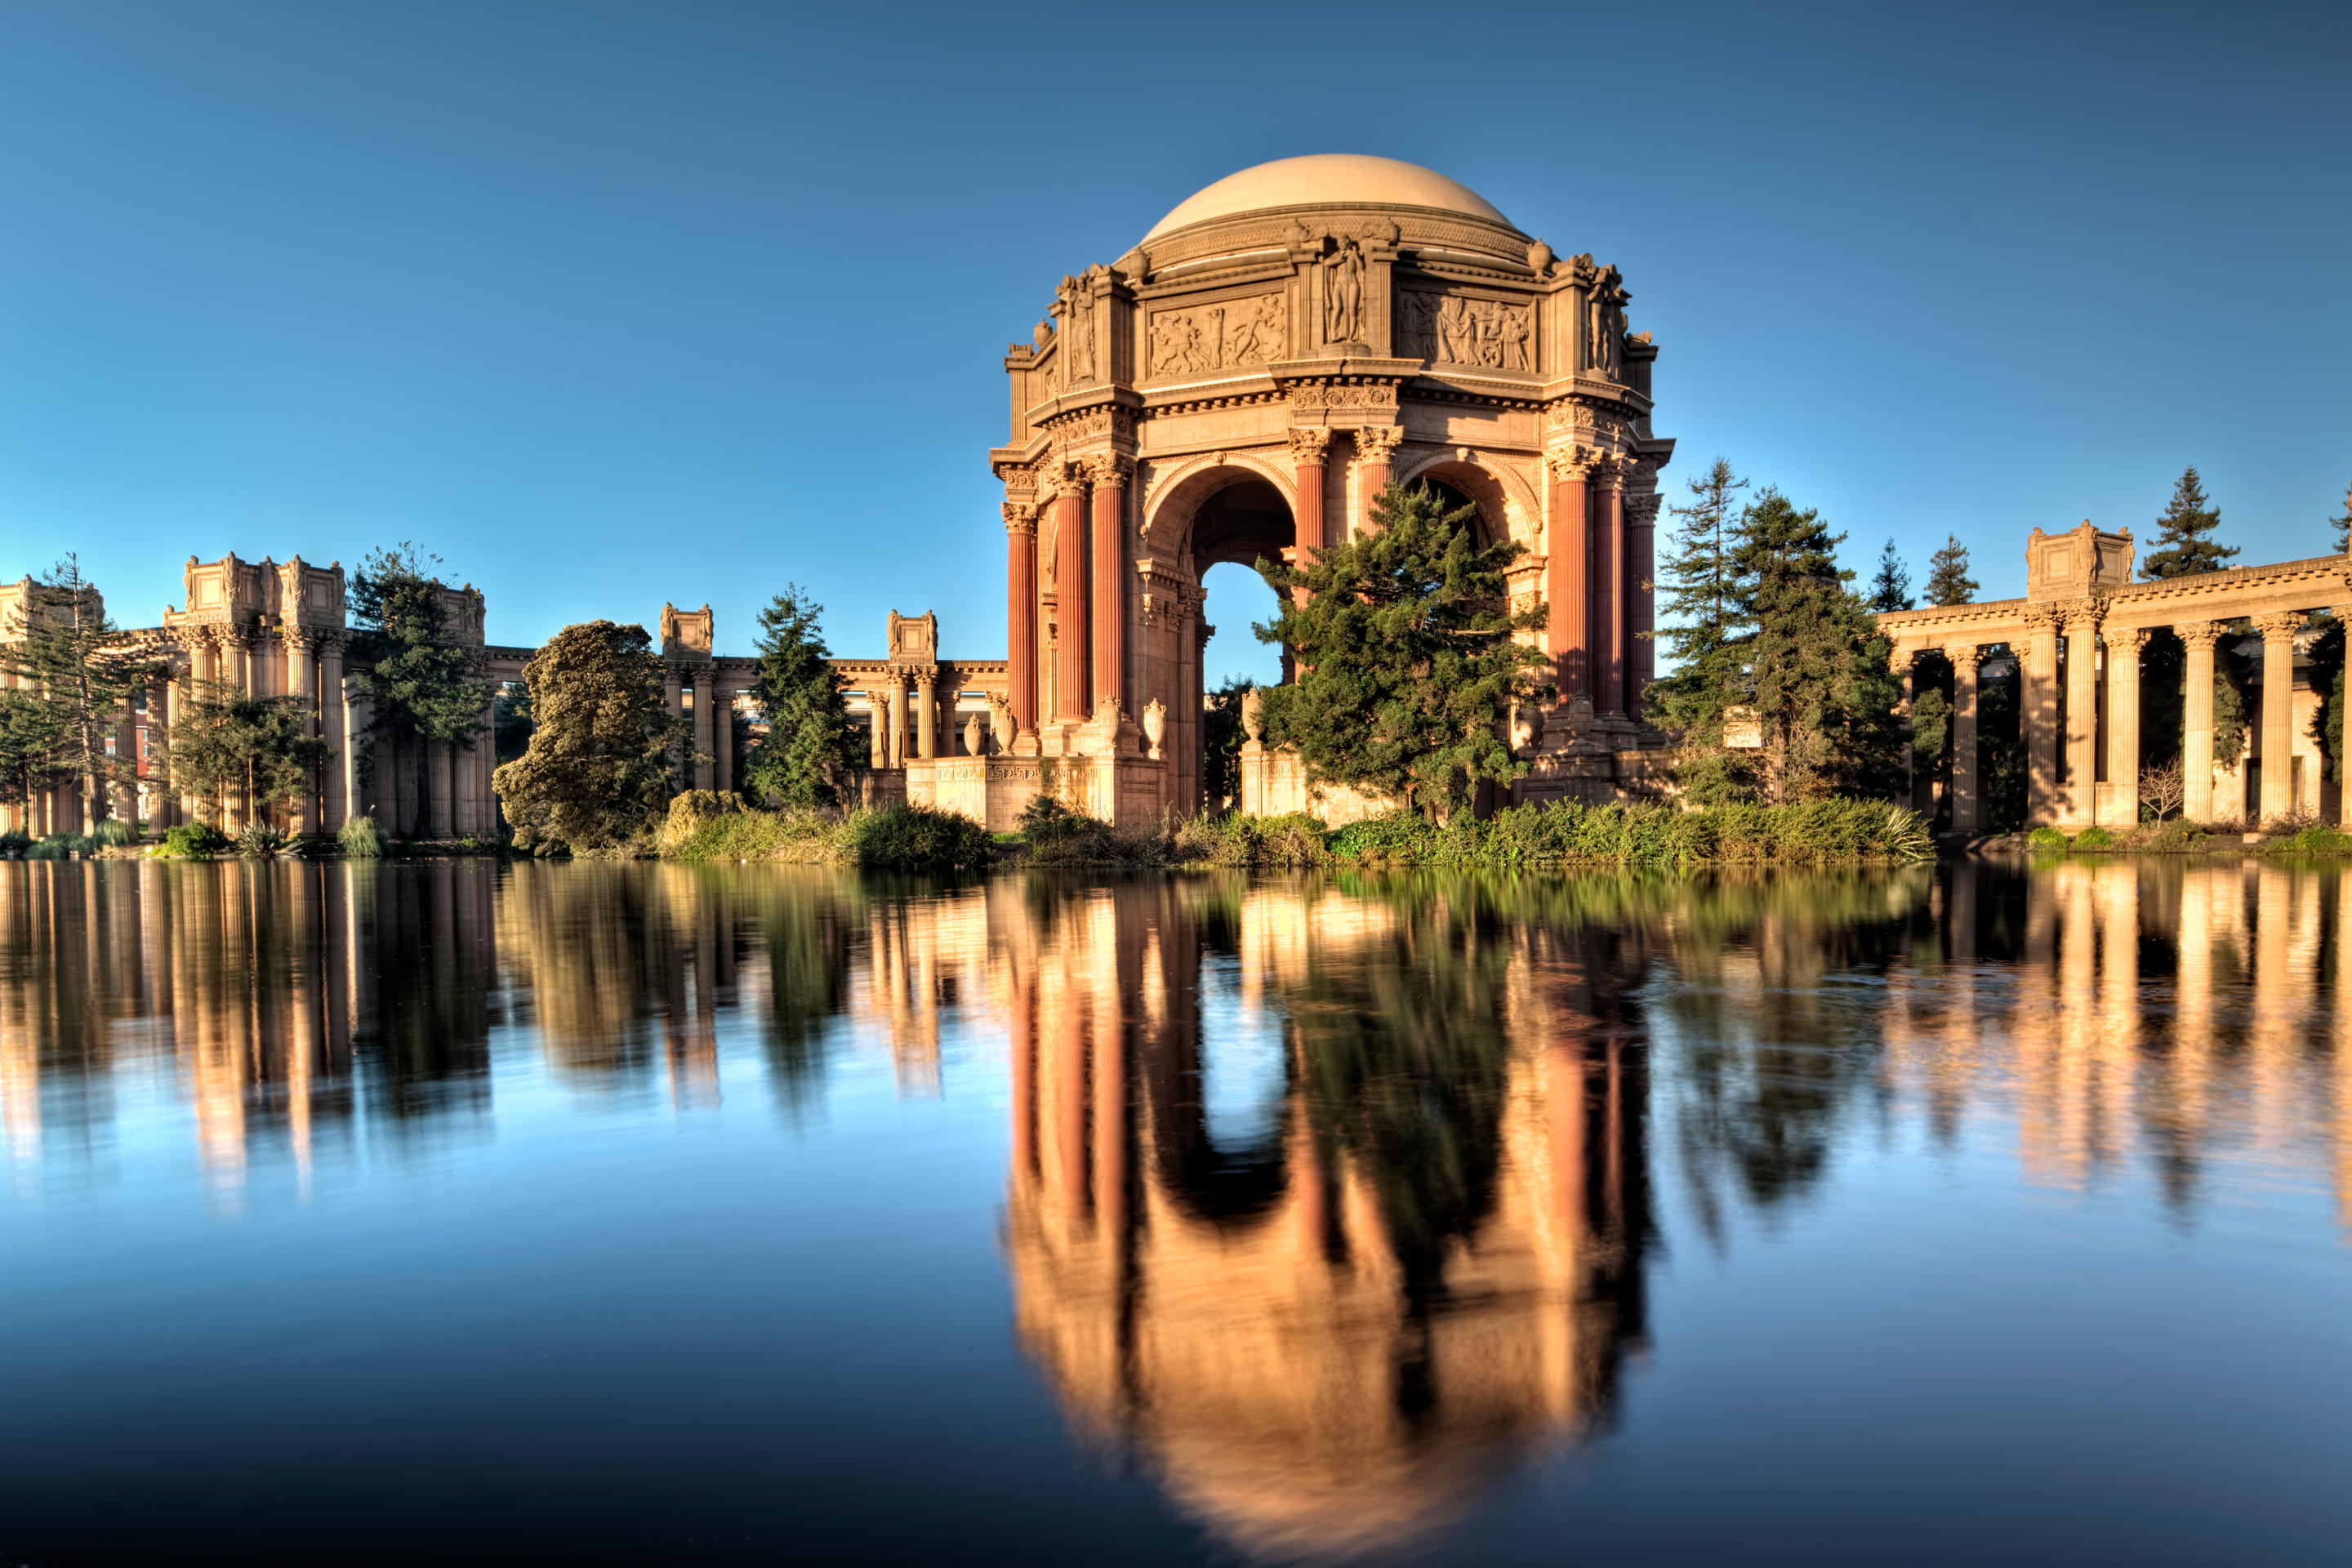 Palace of Fine Arts Theatre Overview